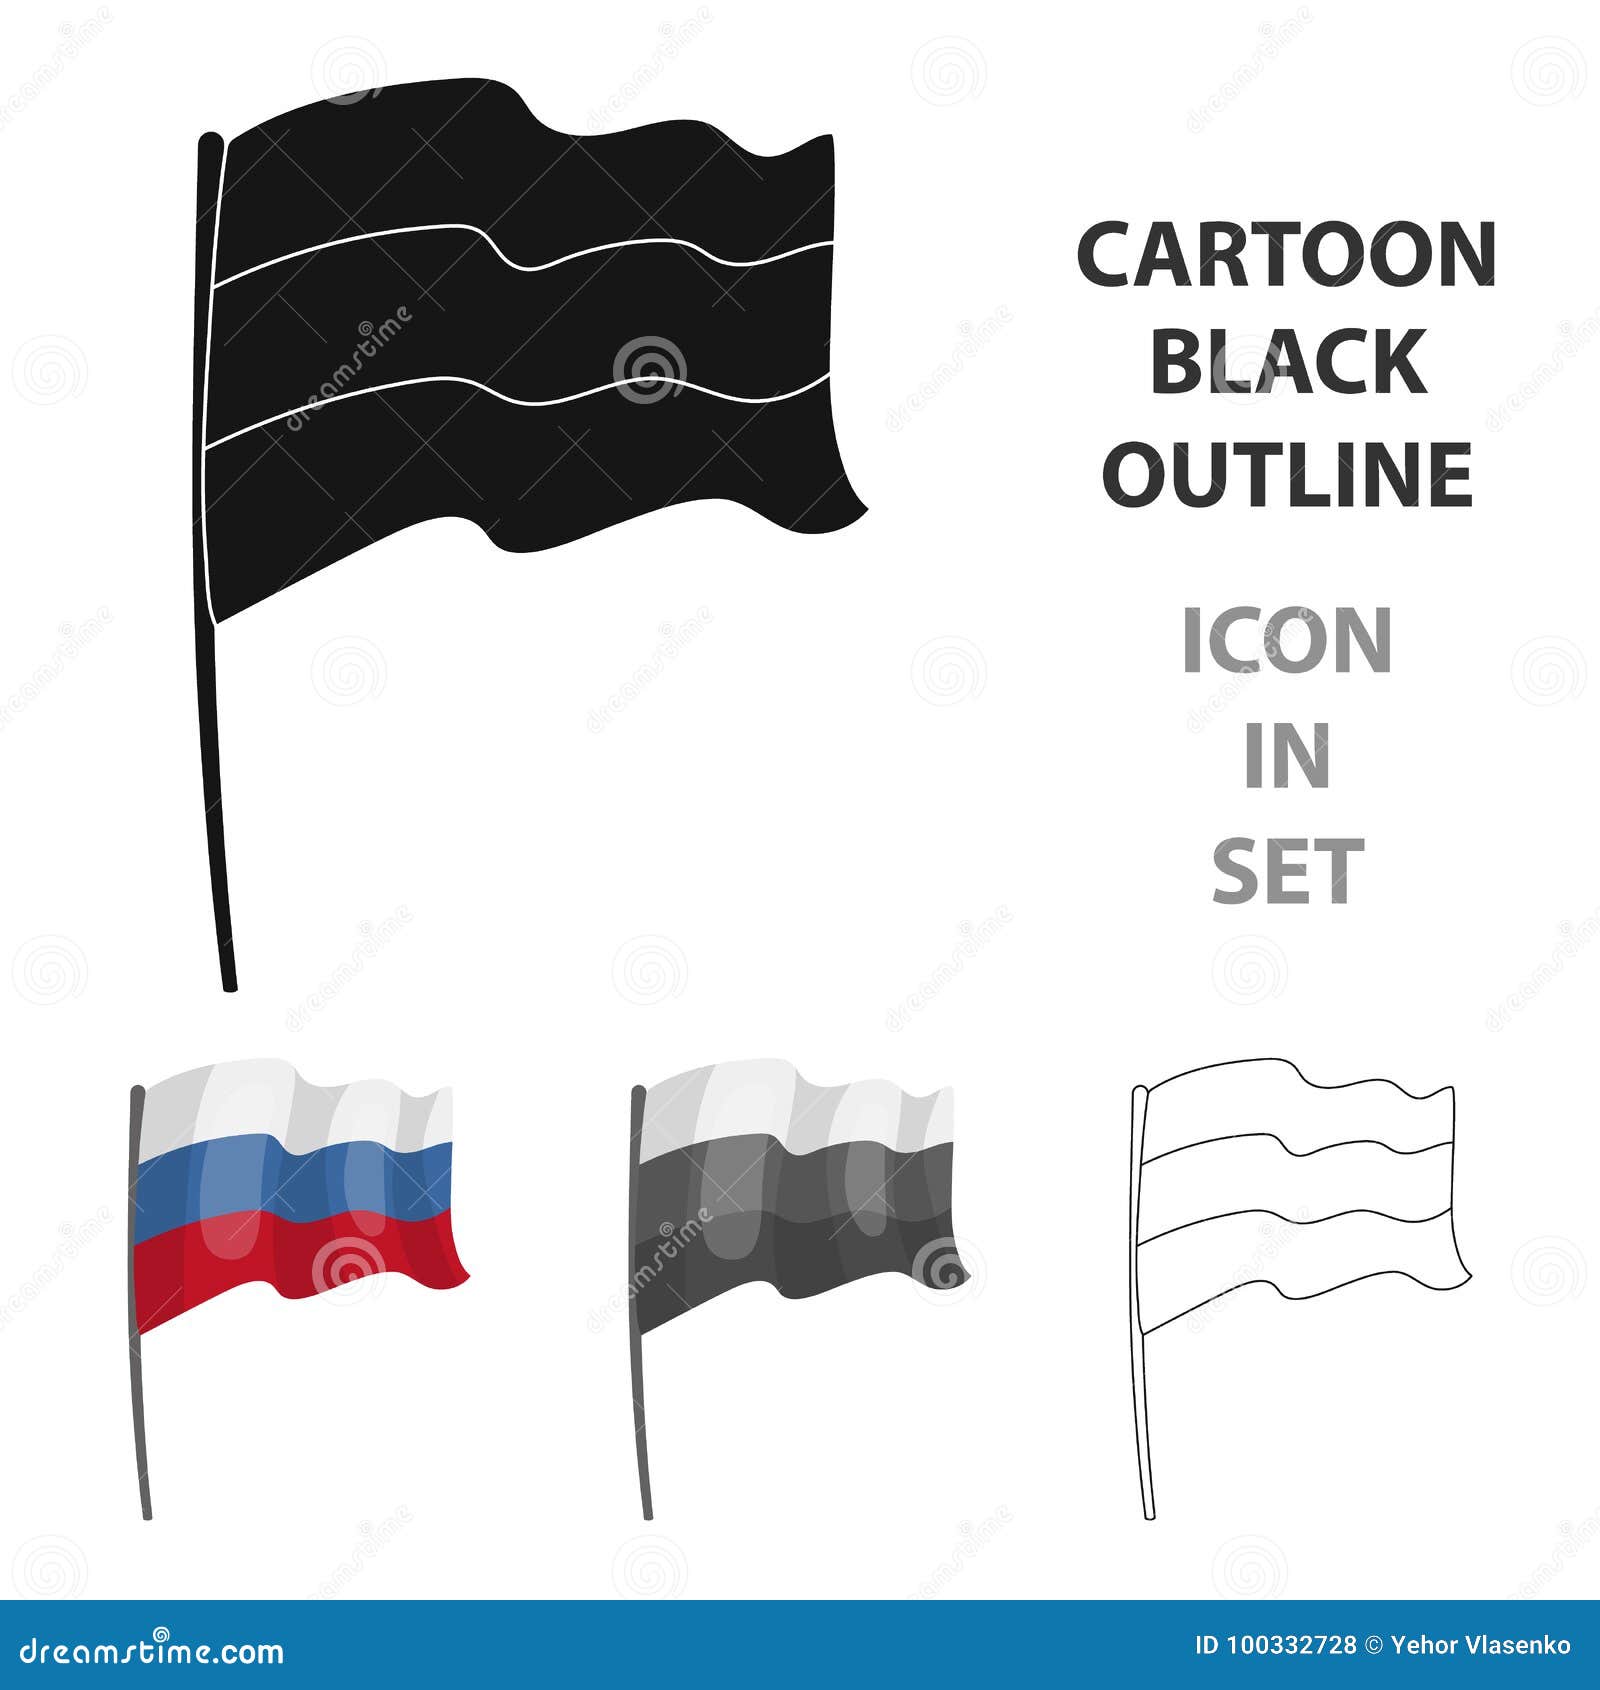 Russia - Free flags icons